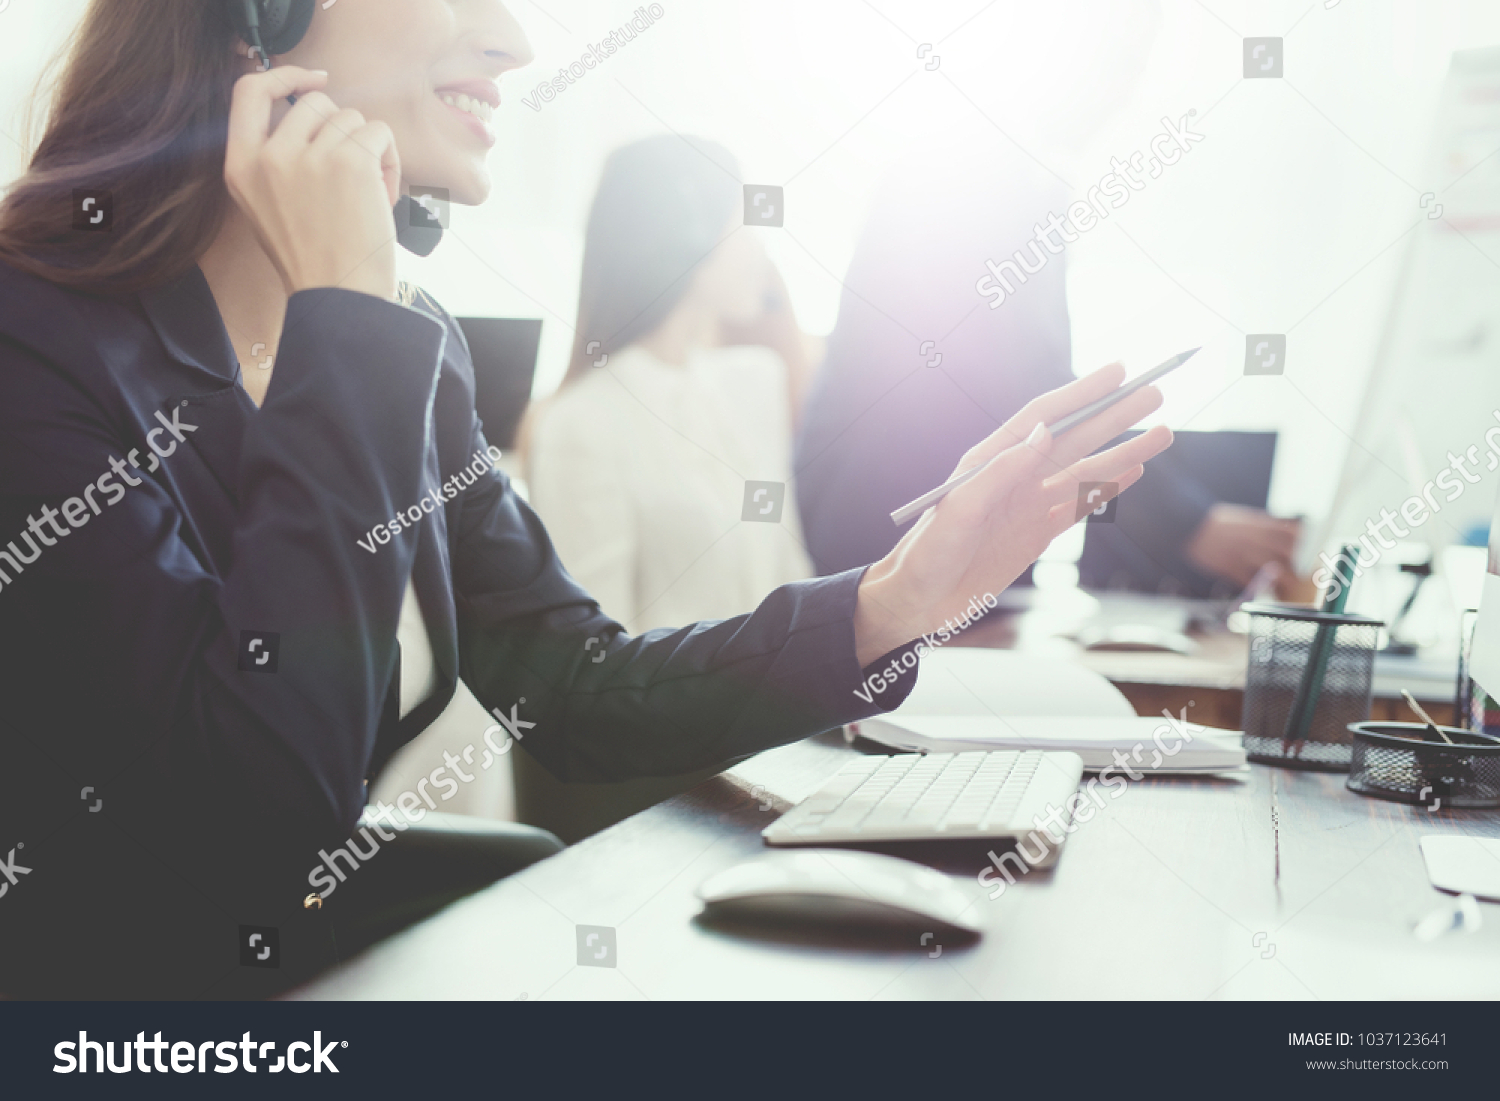 A young girl is looking at a computer screen in the office and is talking on the phone. She works in the call center. She's in a good mood. Call center concept. #1037123641